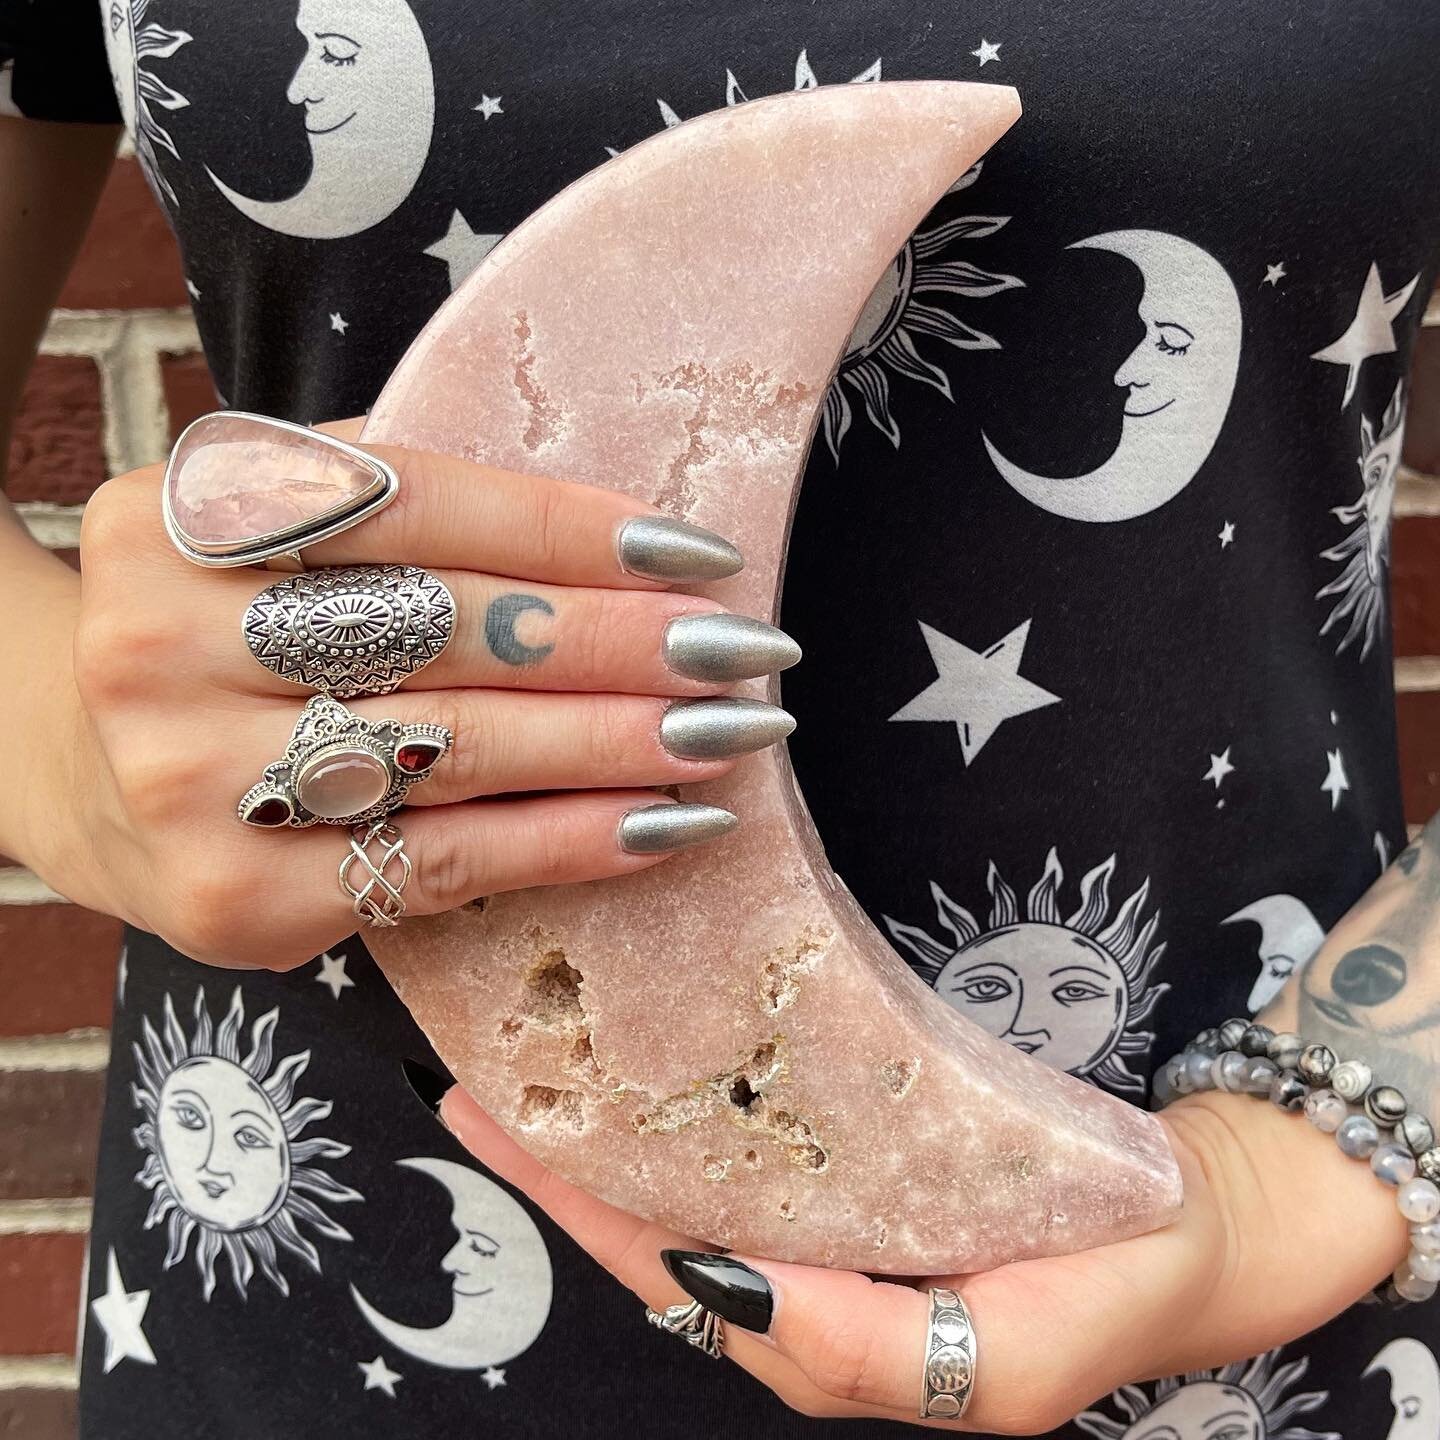 𝒟𝓇𝑒𝒶𝓂𝓎 🌙

This pink amethyst crescent moon is a SWEET DREAM 💕

Paired with some Rose Quartz rings, we&rsquo;re feeling pretty in pink as we round out our Salem store takeover! 💗

Invoices for everything claimed today will be sent out tomorro